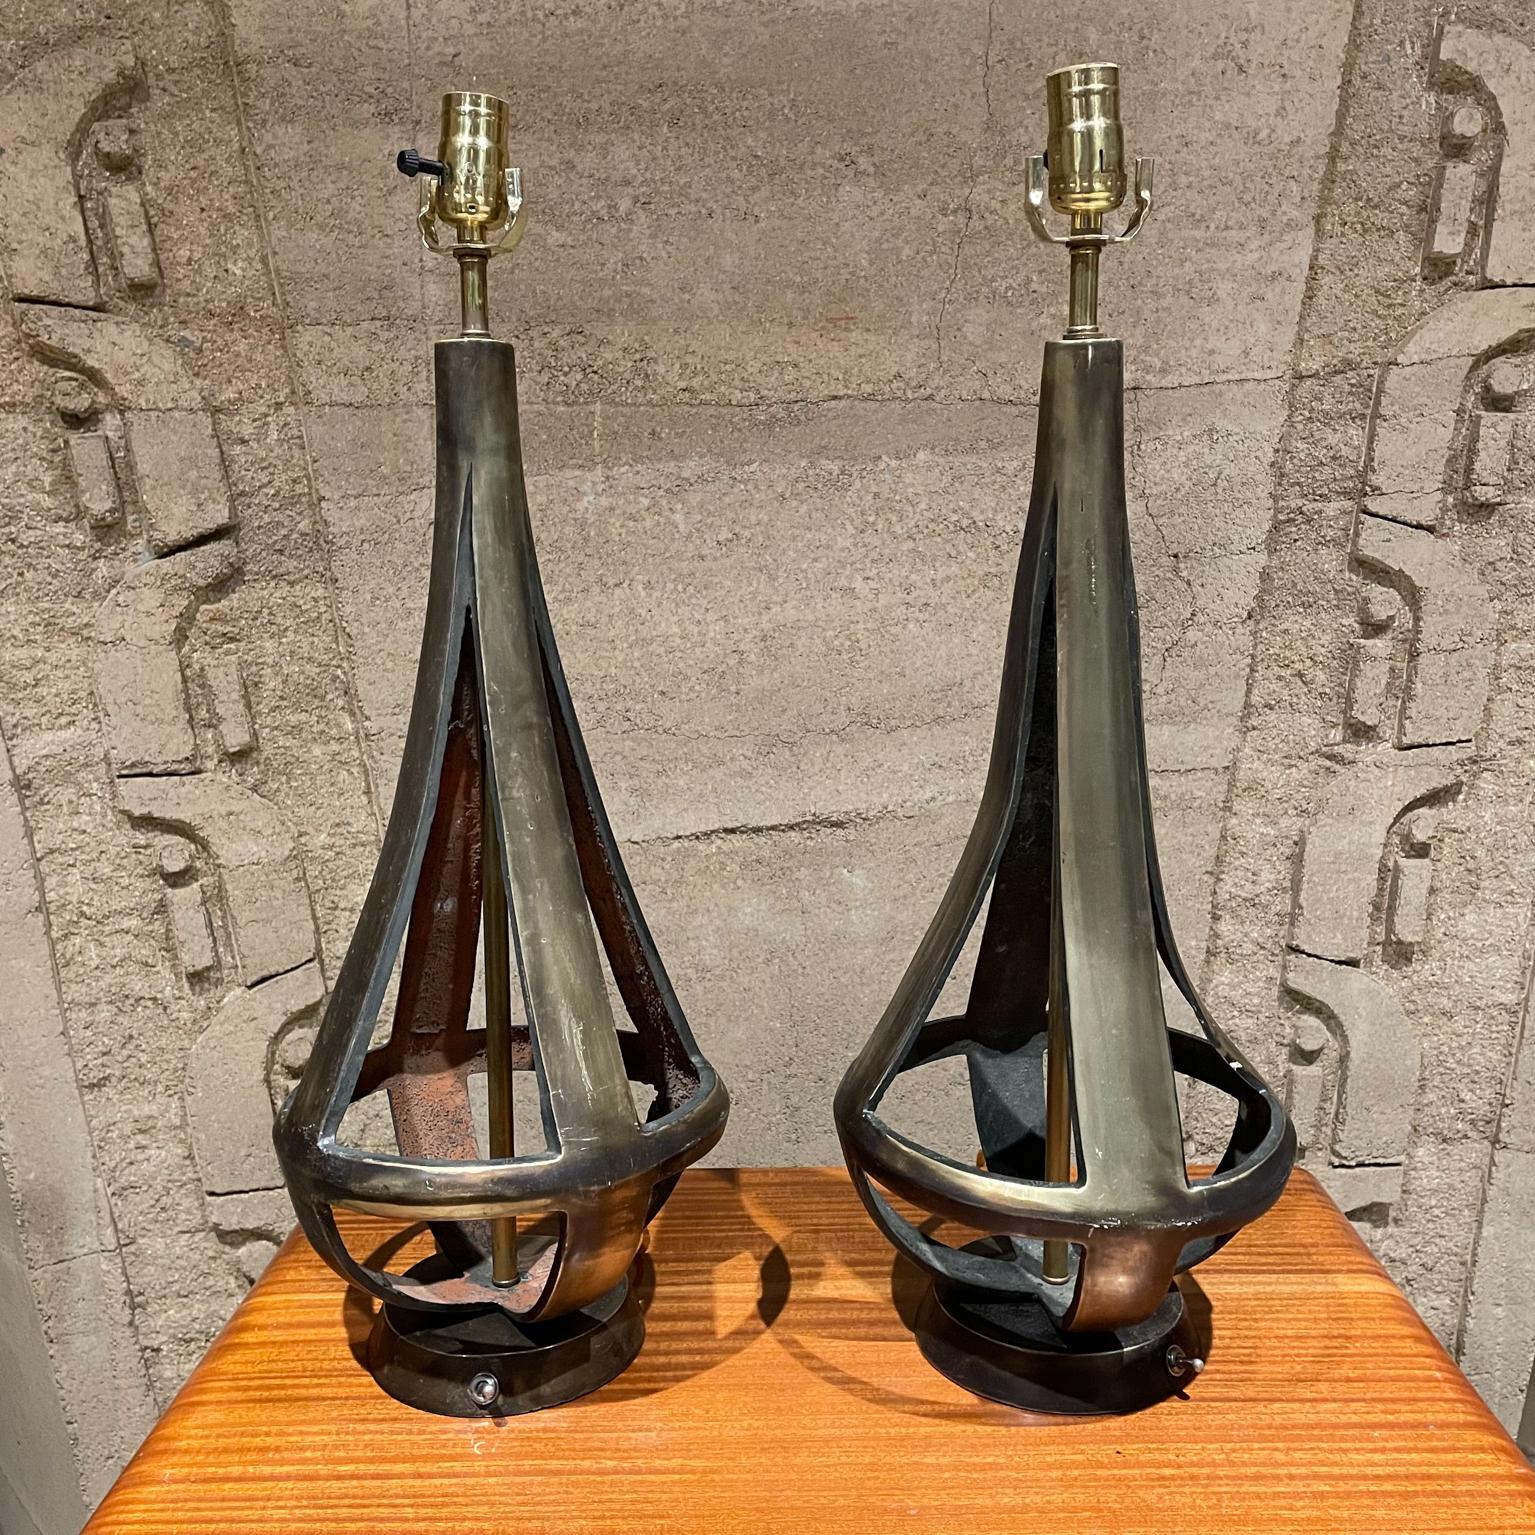 Table lamps
Sensational sculptural two-tone bronze table lamps by Arturo Pani Mexico 1950s.
 Unmarked.
Measures: Height 24.75 in. x Diameter 9.25 in.
The lamps have been rewired with silk cord. Brass has been polished. 
Shades are not included